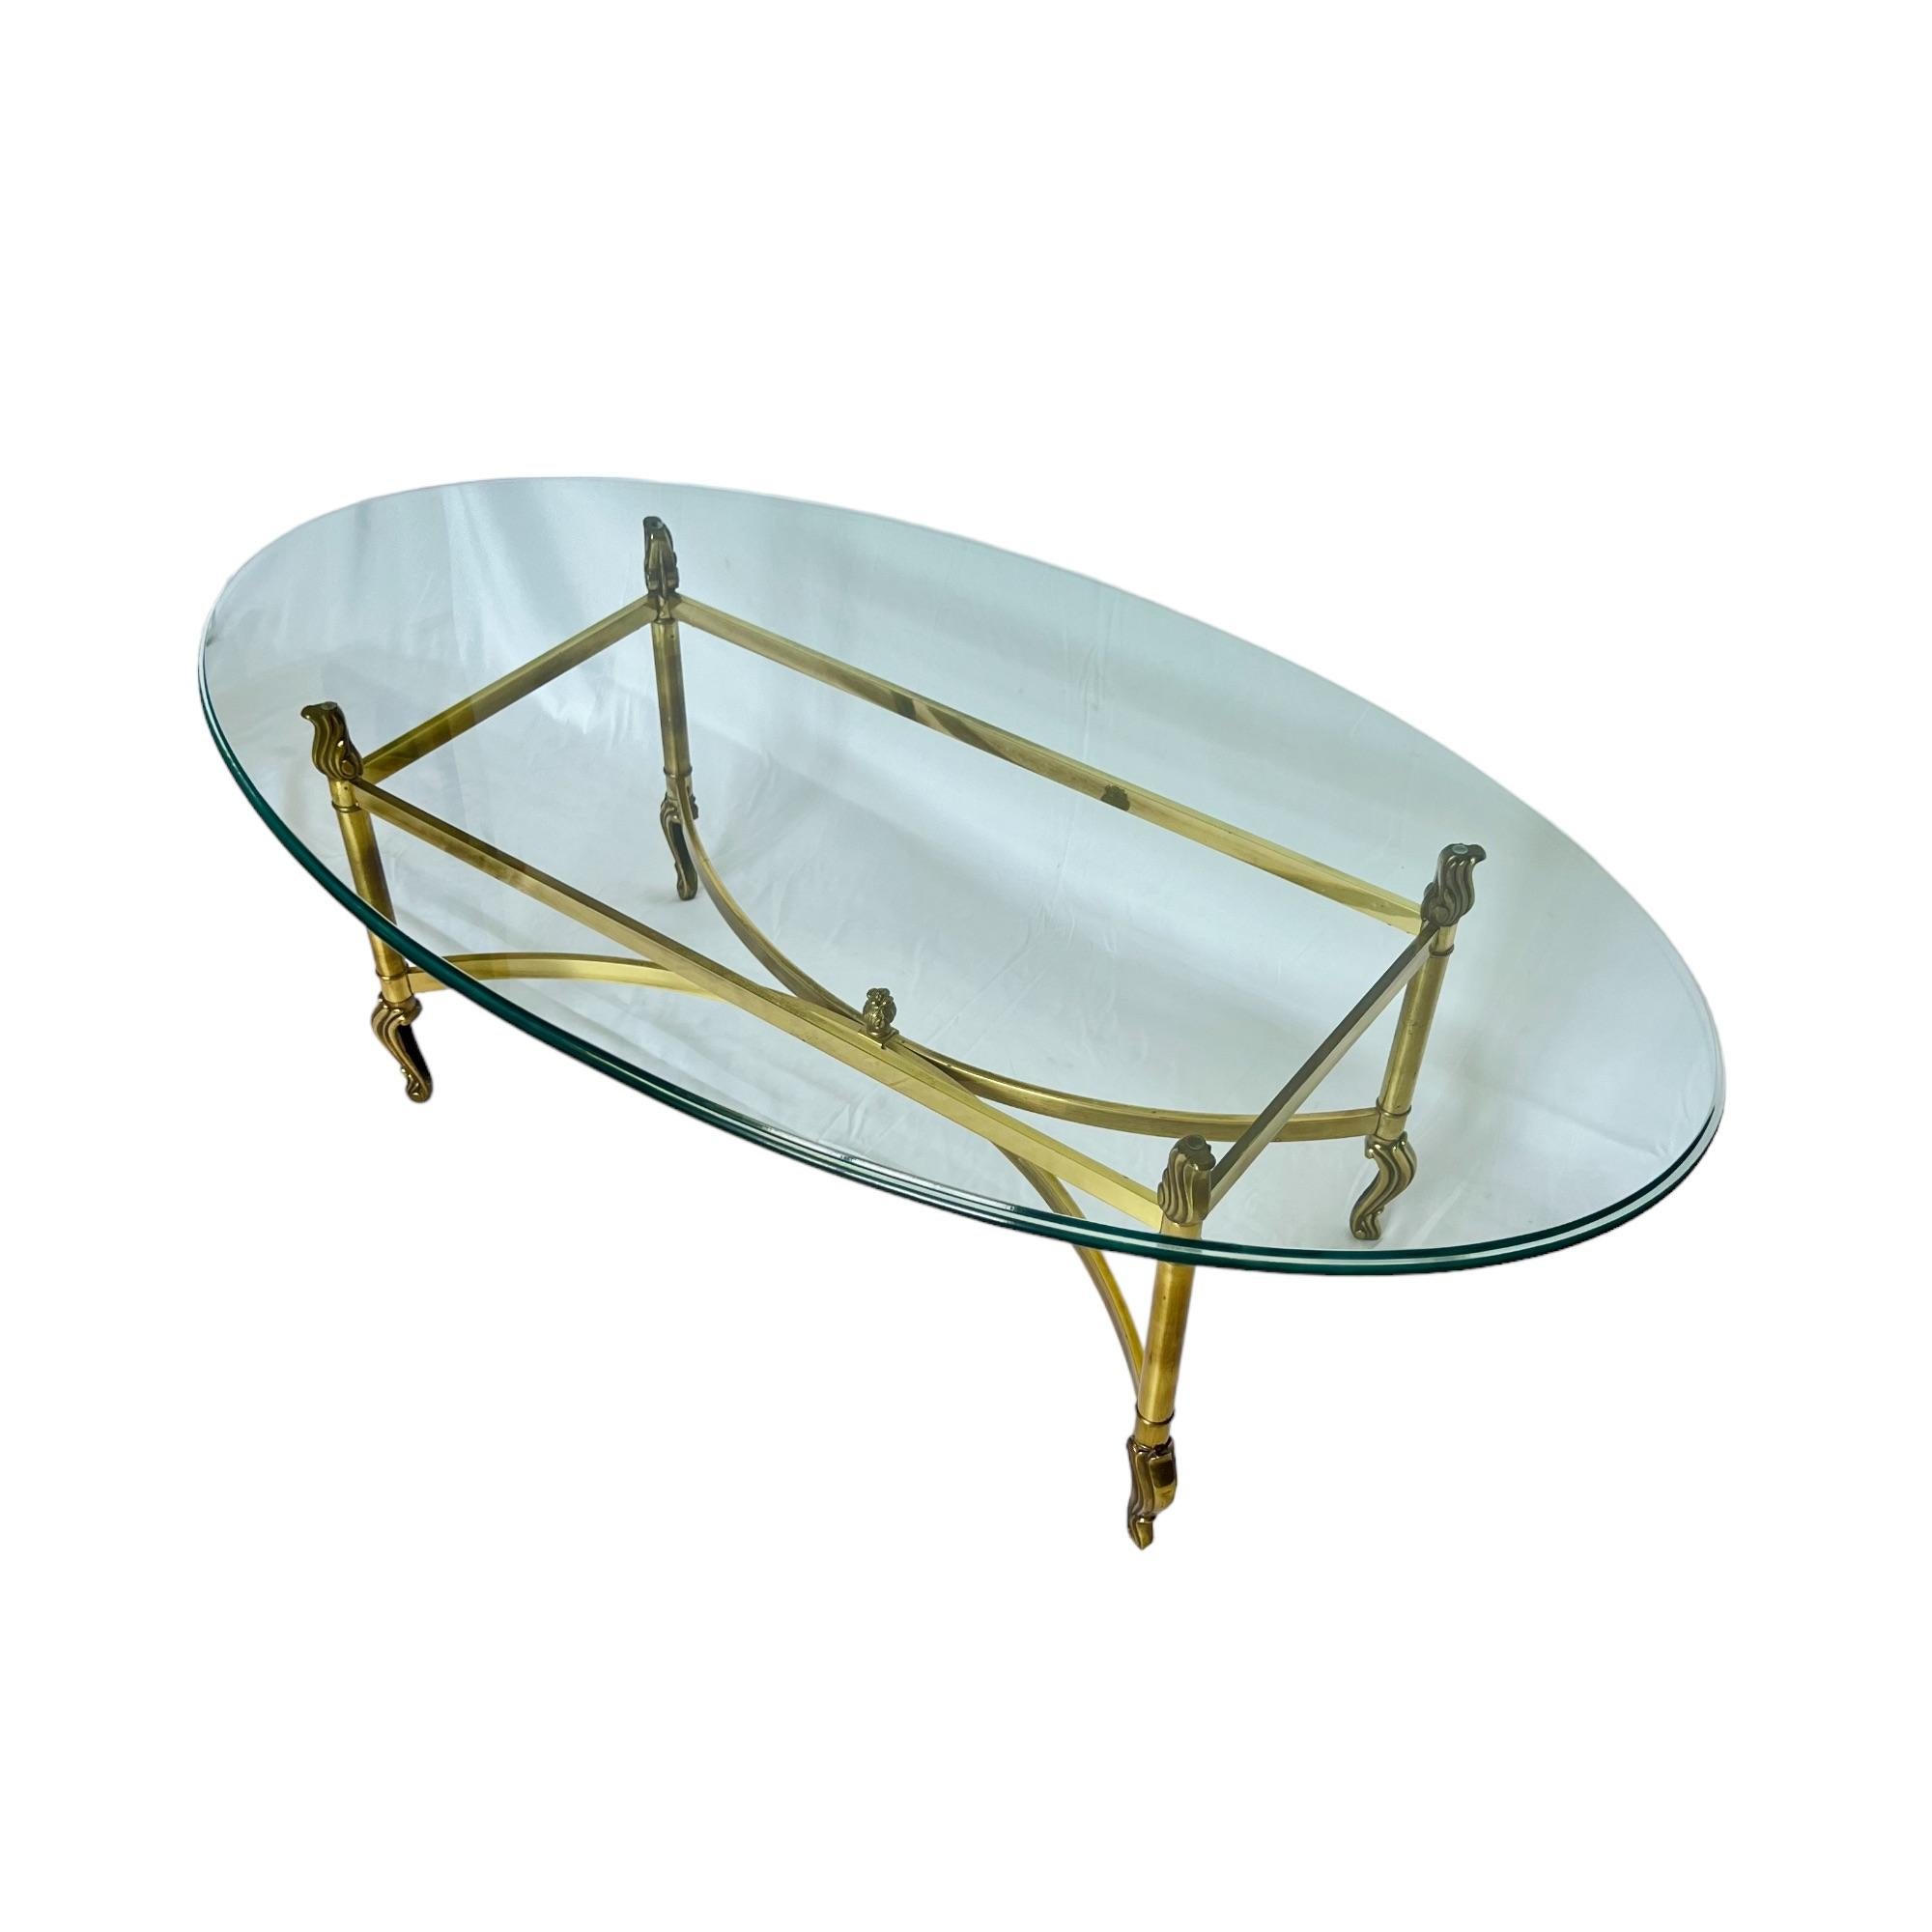 Beveled Neoclassical Brass Oval Glass Top Coffee Table, Late 20th C.